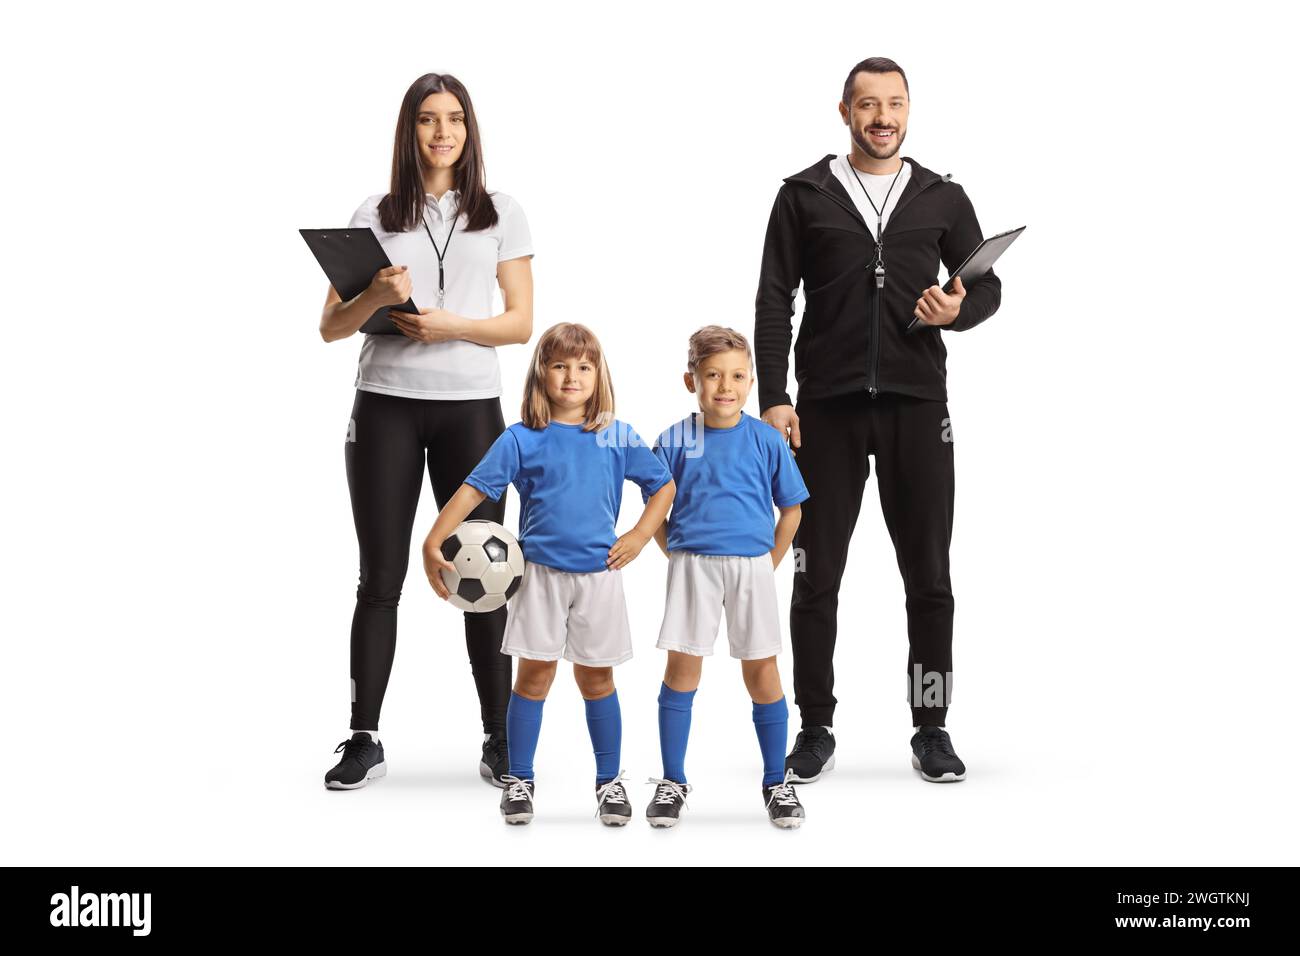 Football coaches with children in kits posing and looking at camera isolated on white background Stock Photo